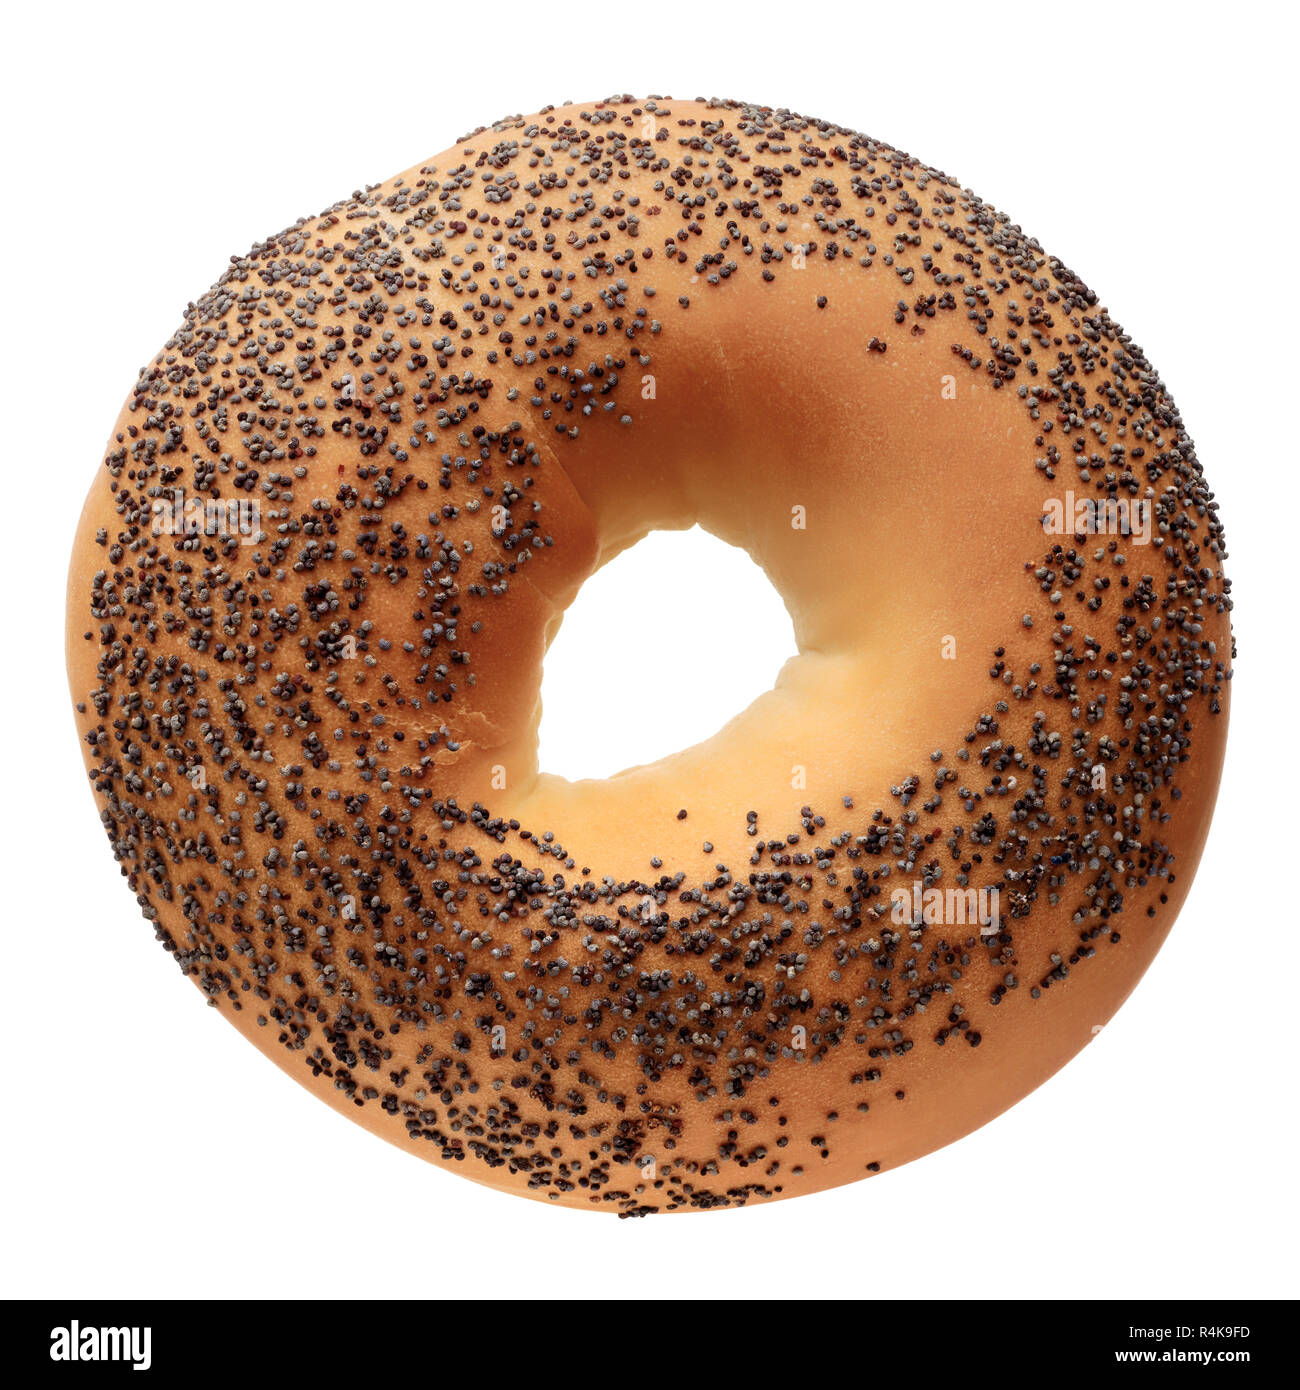 Food: single bagel with poppy seeds, isolated on white background Stock Photo